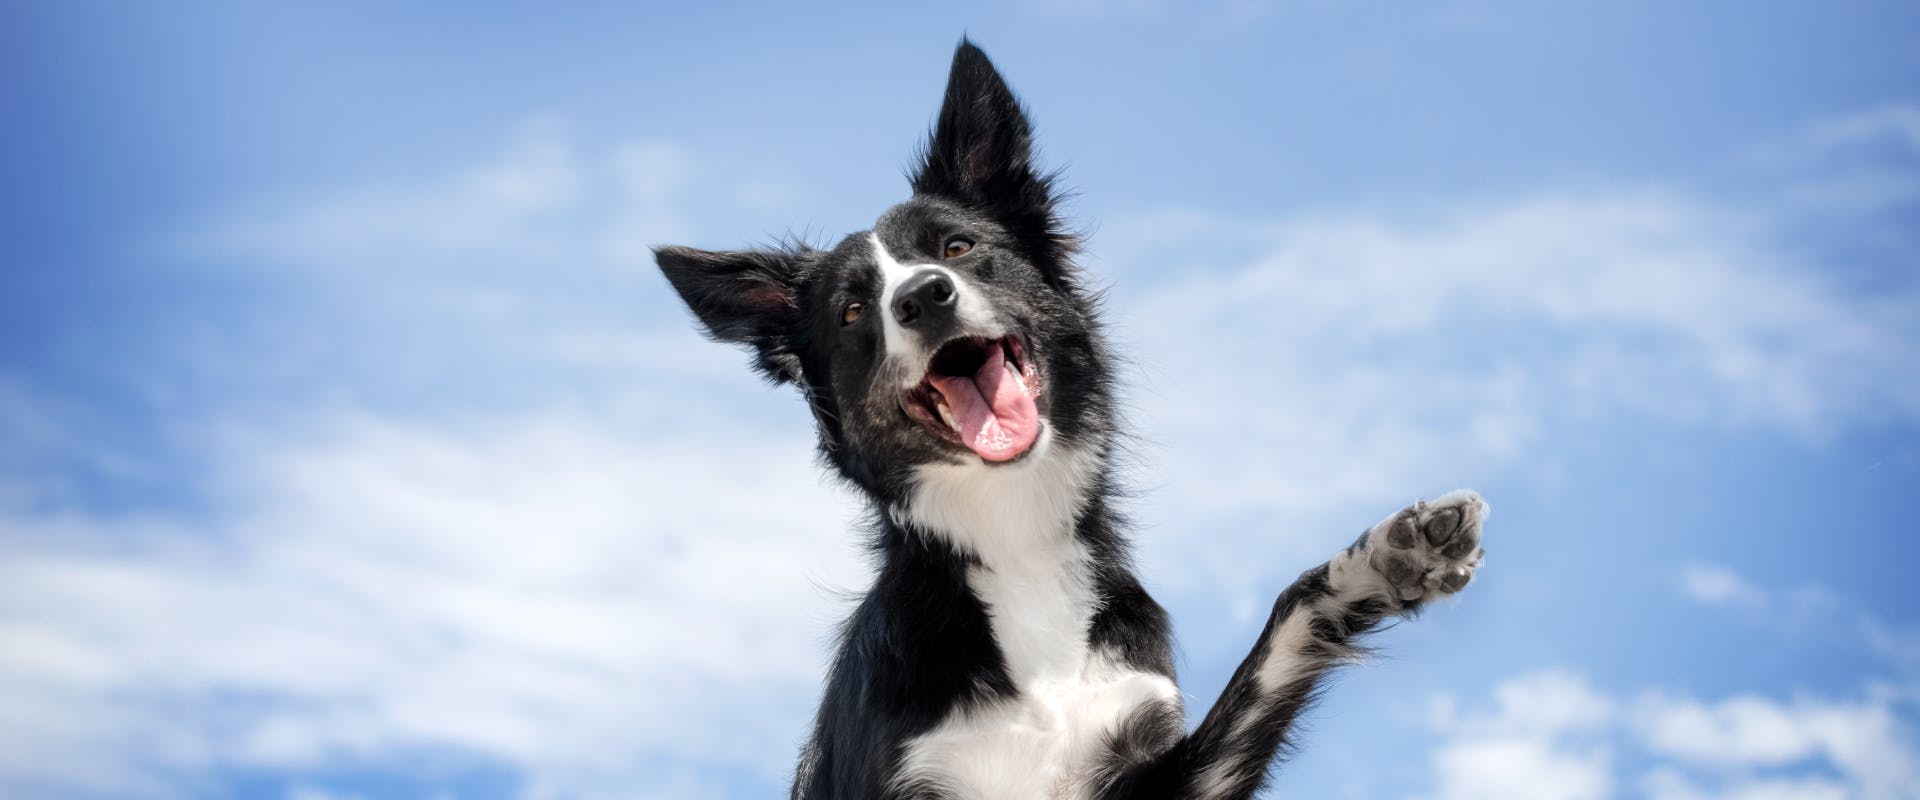 A dog lifts its paw in the air.